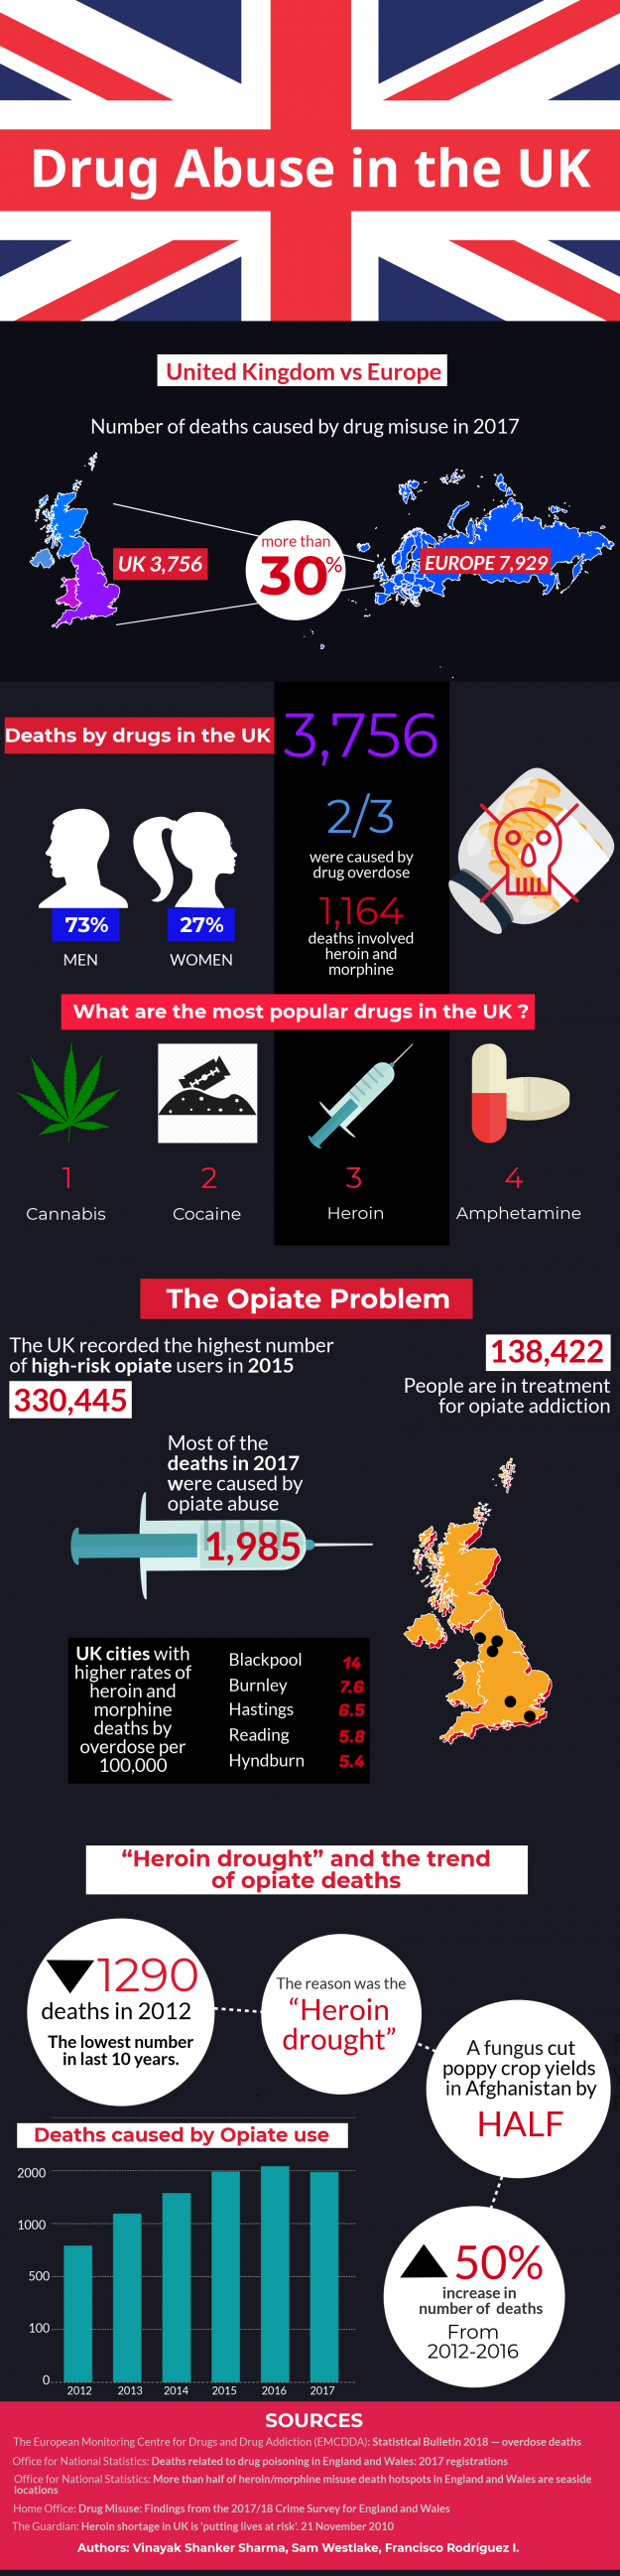 Drug abuse in the UK 2018